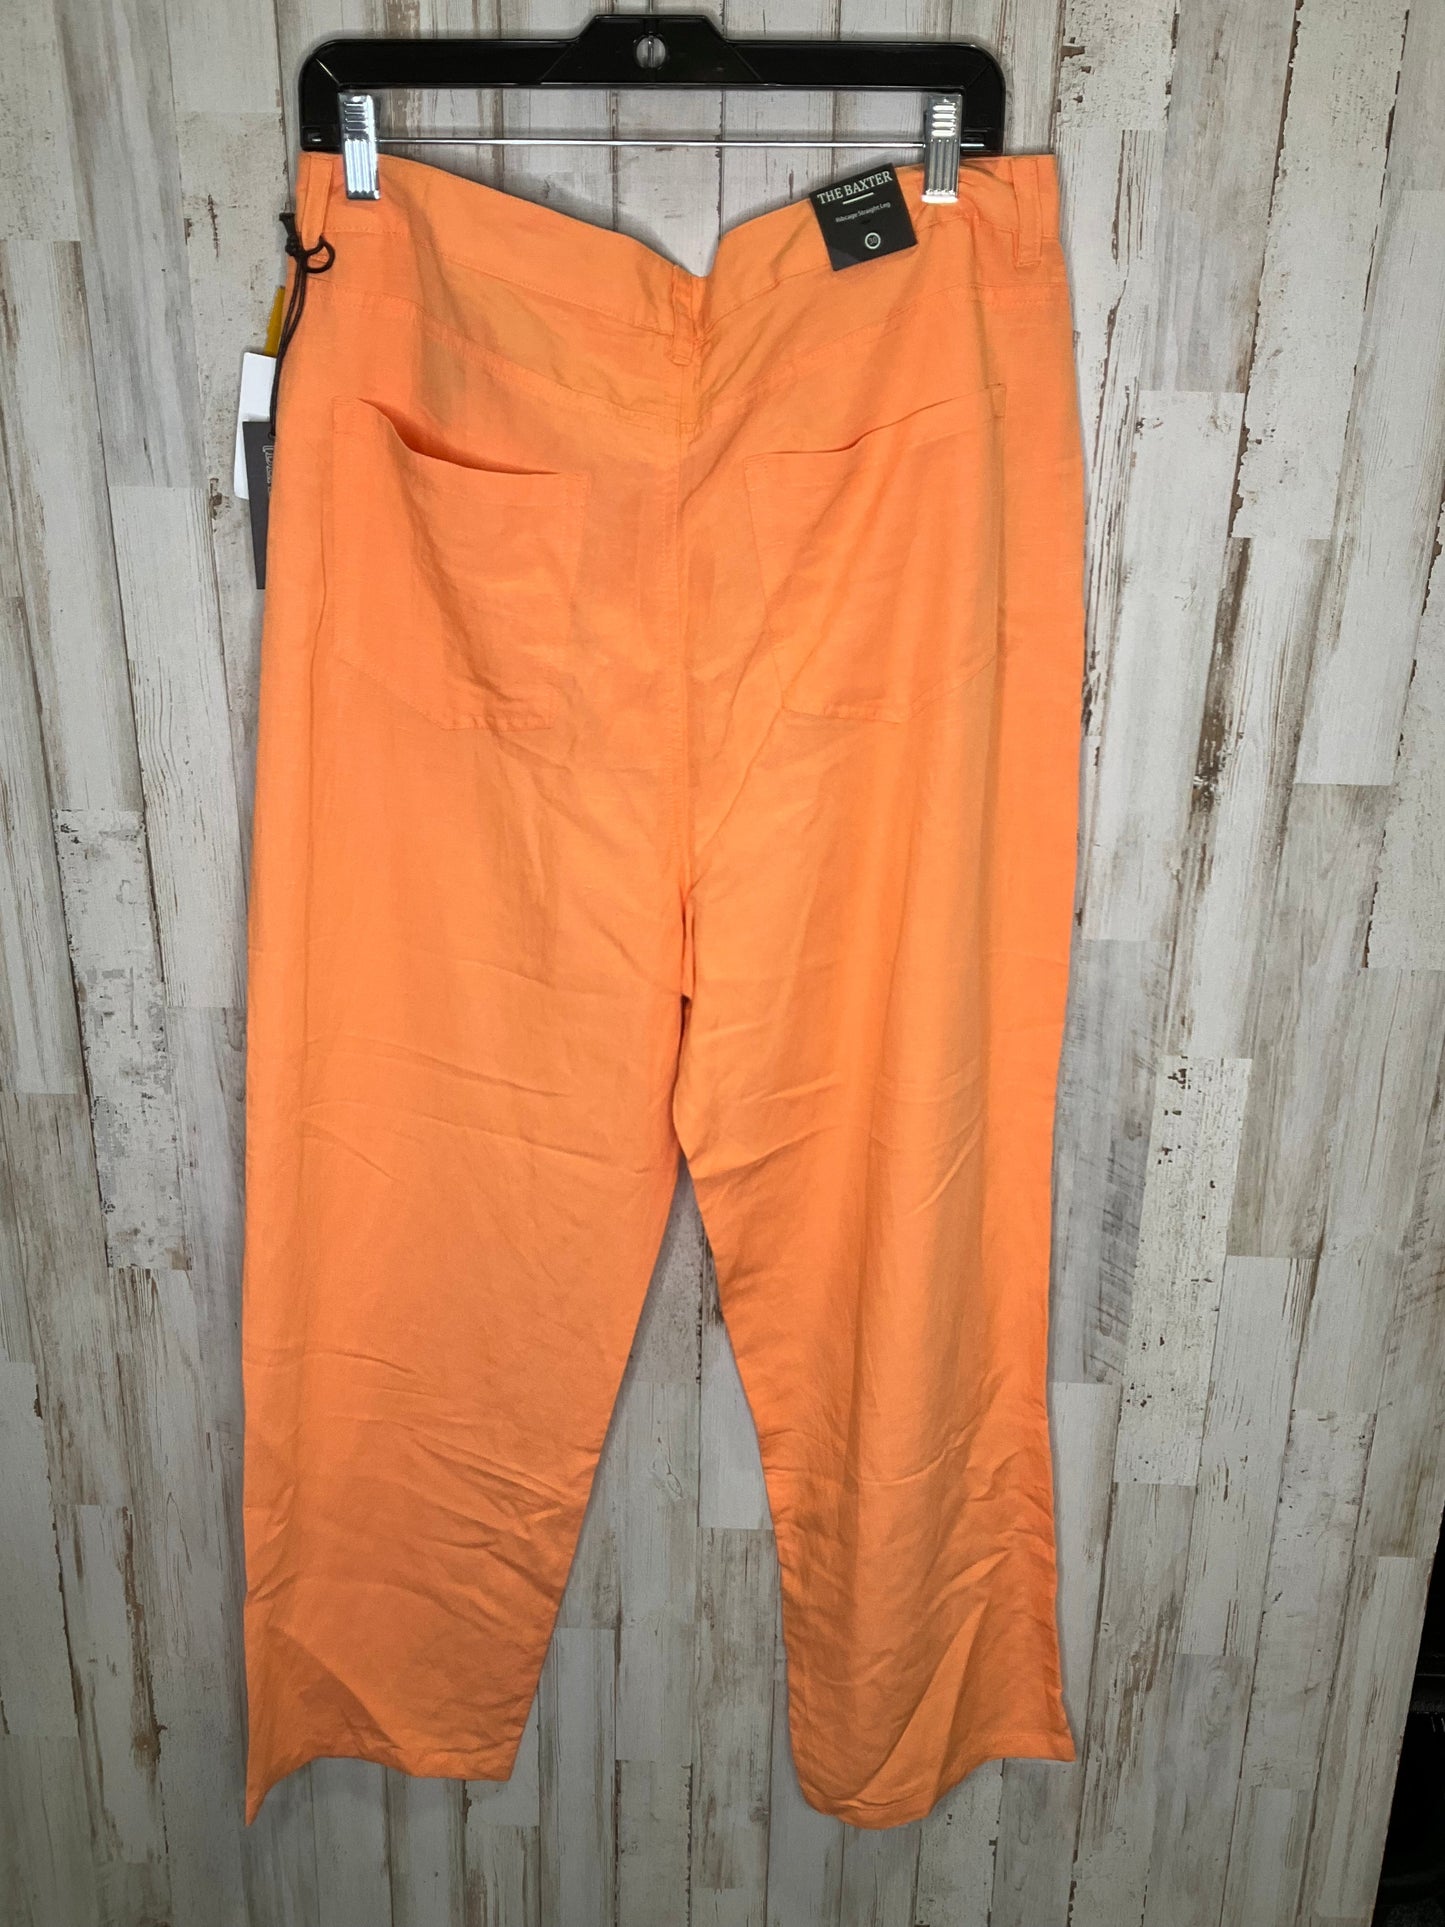 Pants Other By Blanknyc  Size: 10